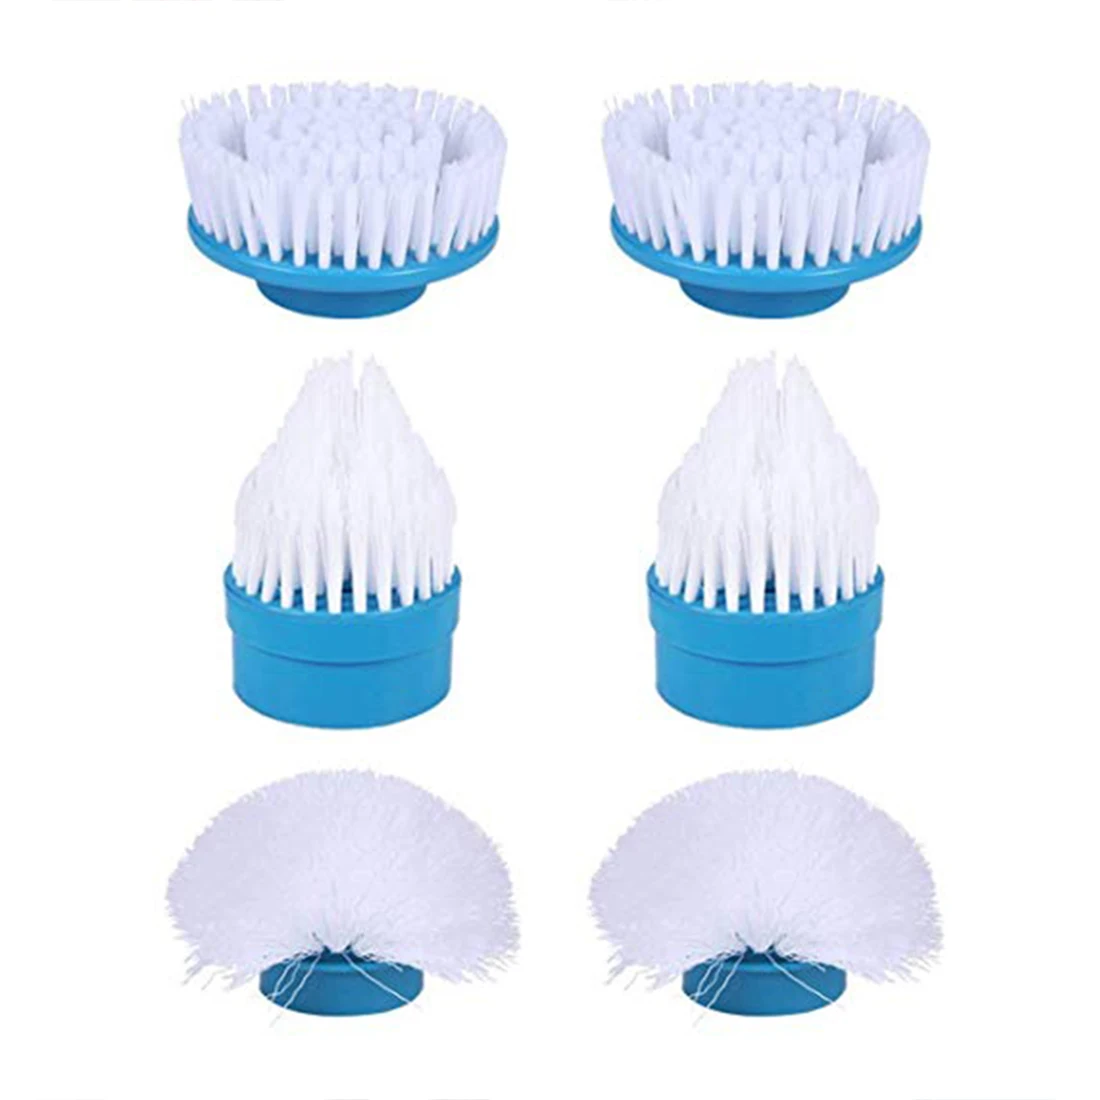 

Scrubber Cleaning Brush Bathroom Floor Tiles Household Cleaning Tool For Kitchen Bathroom 6Pcs